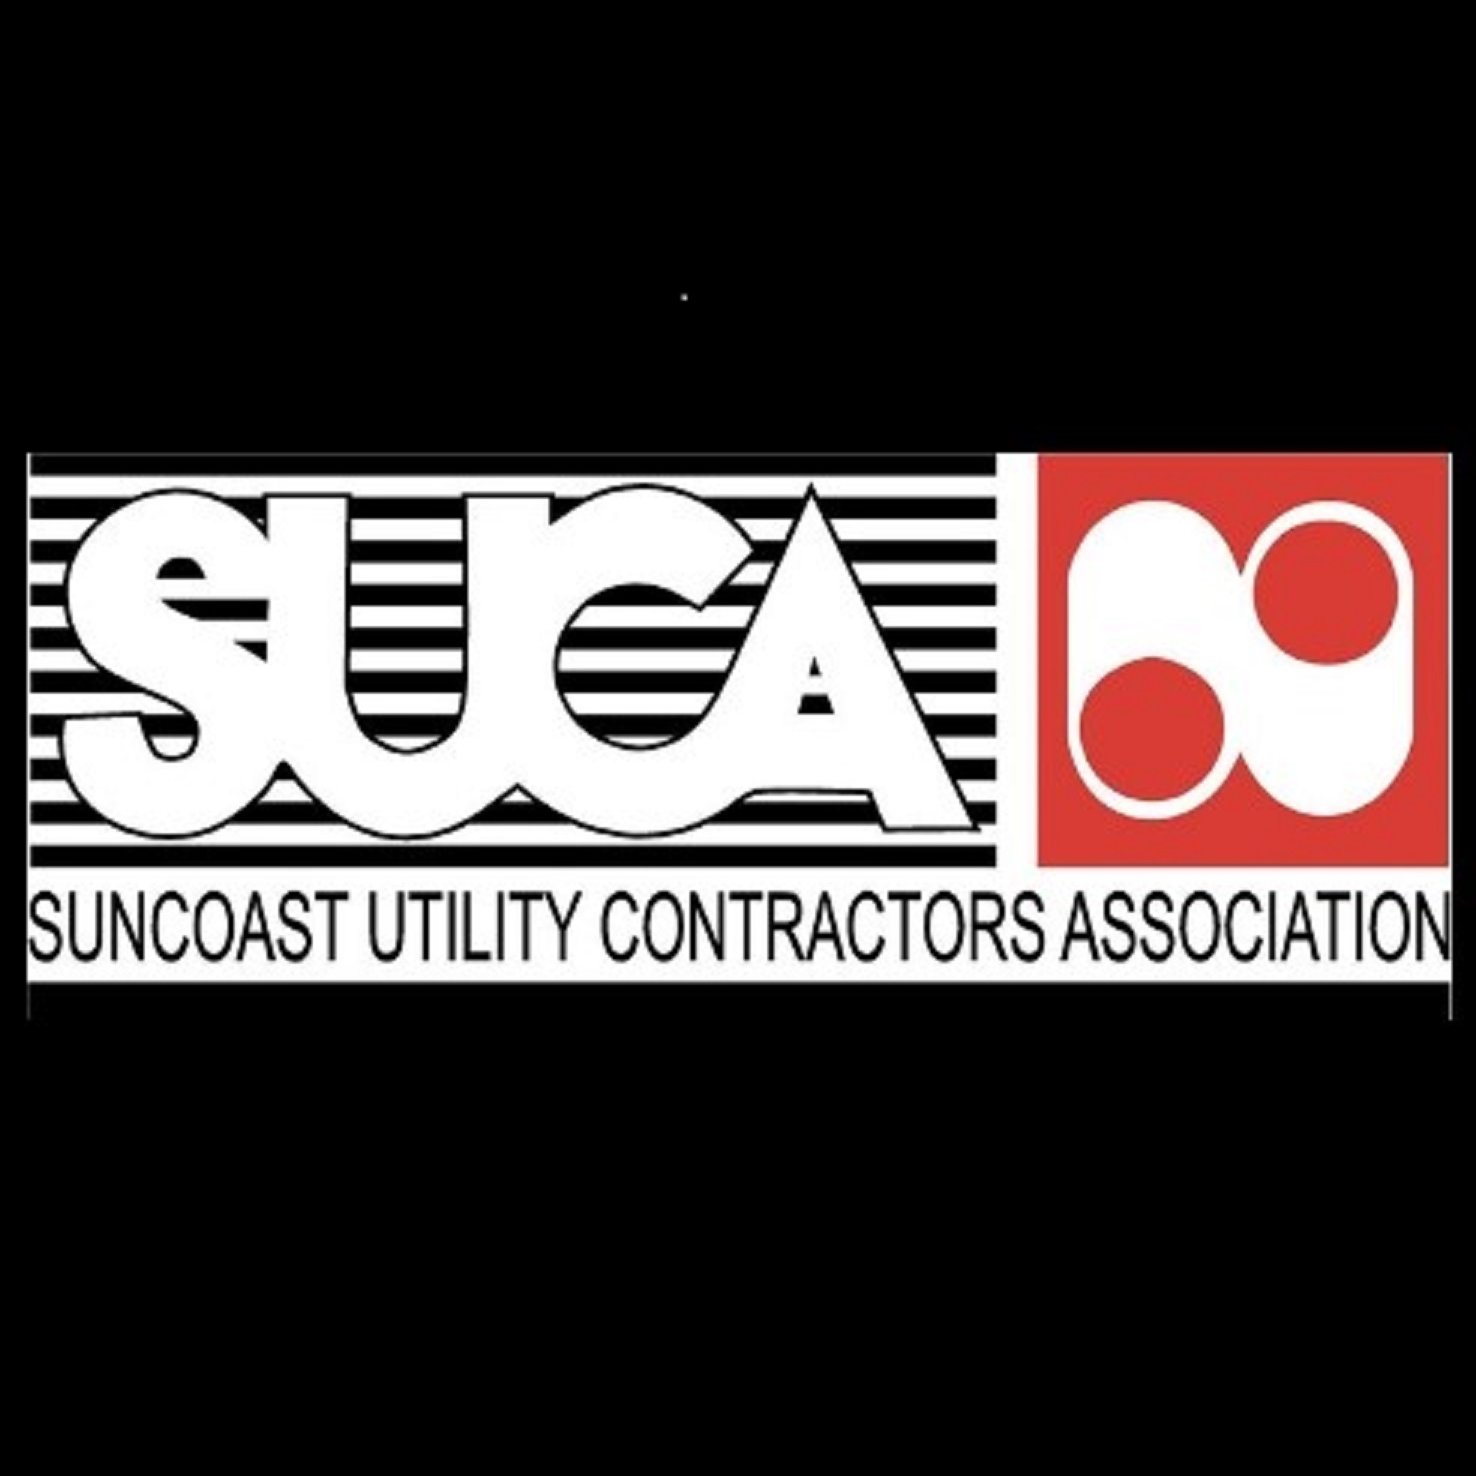 Suncoast Utility Contractors Association - Representing the Underground Utility Construction Industry in the Tampa Bay Area